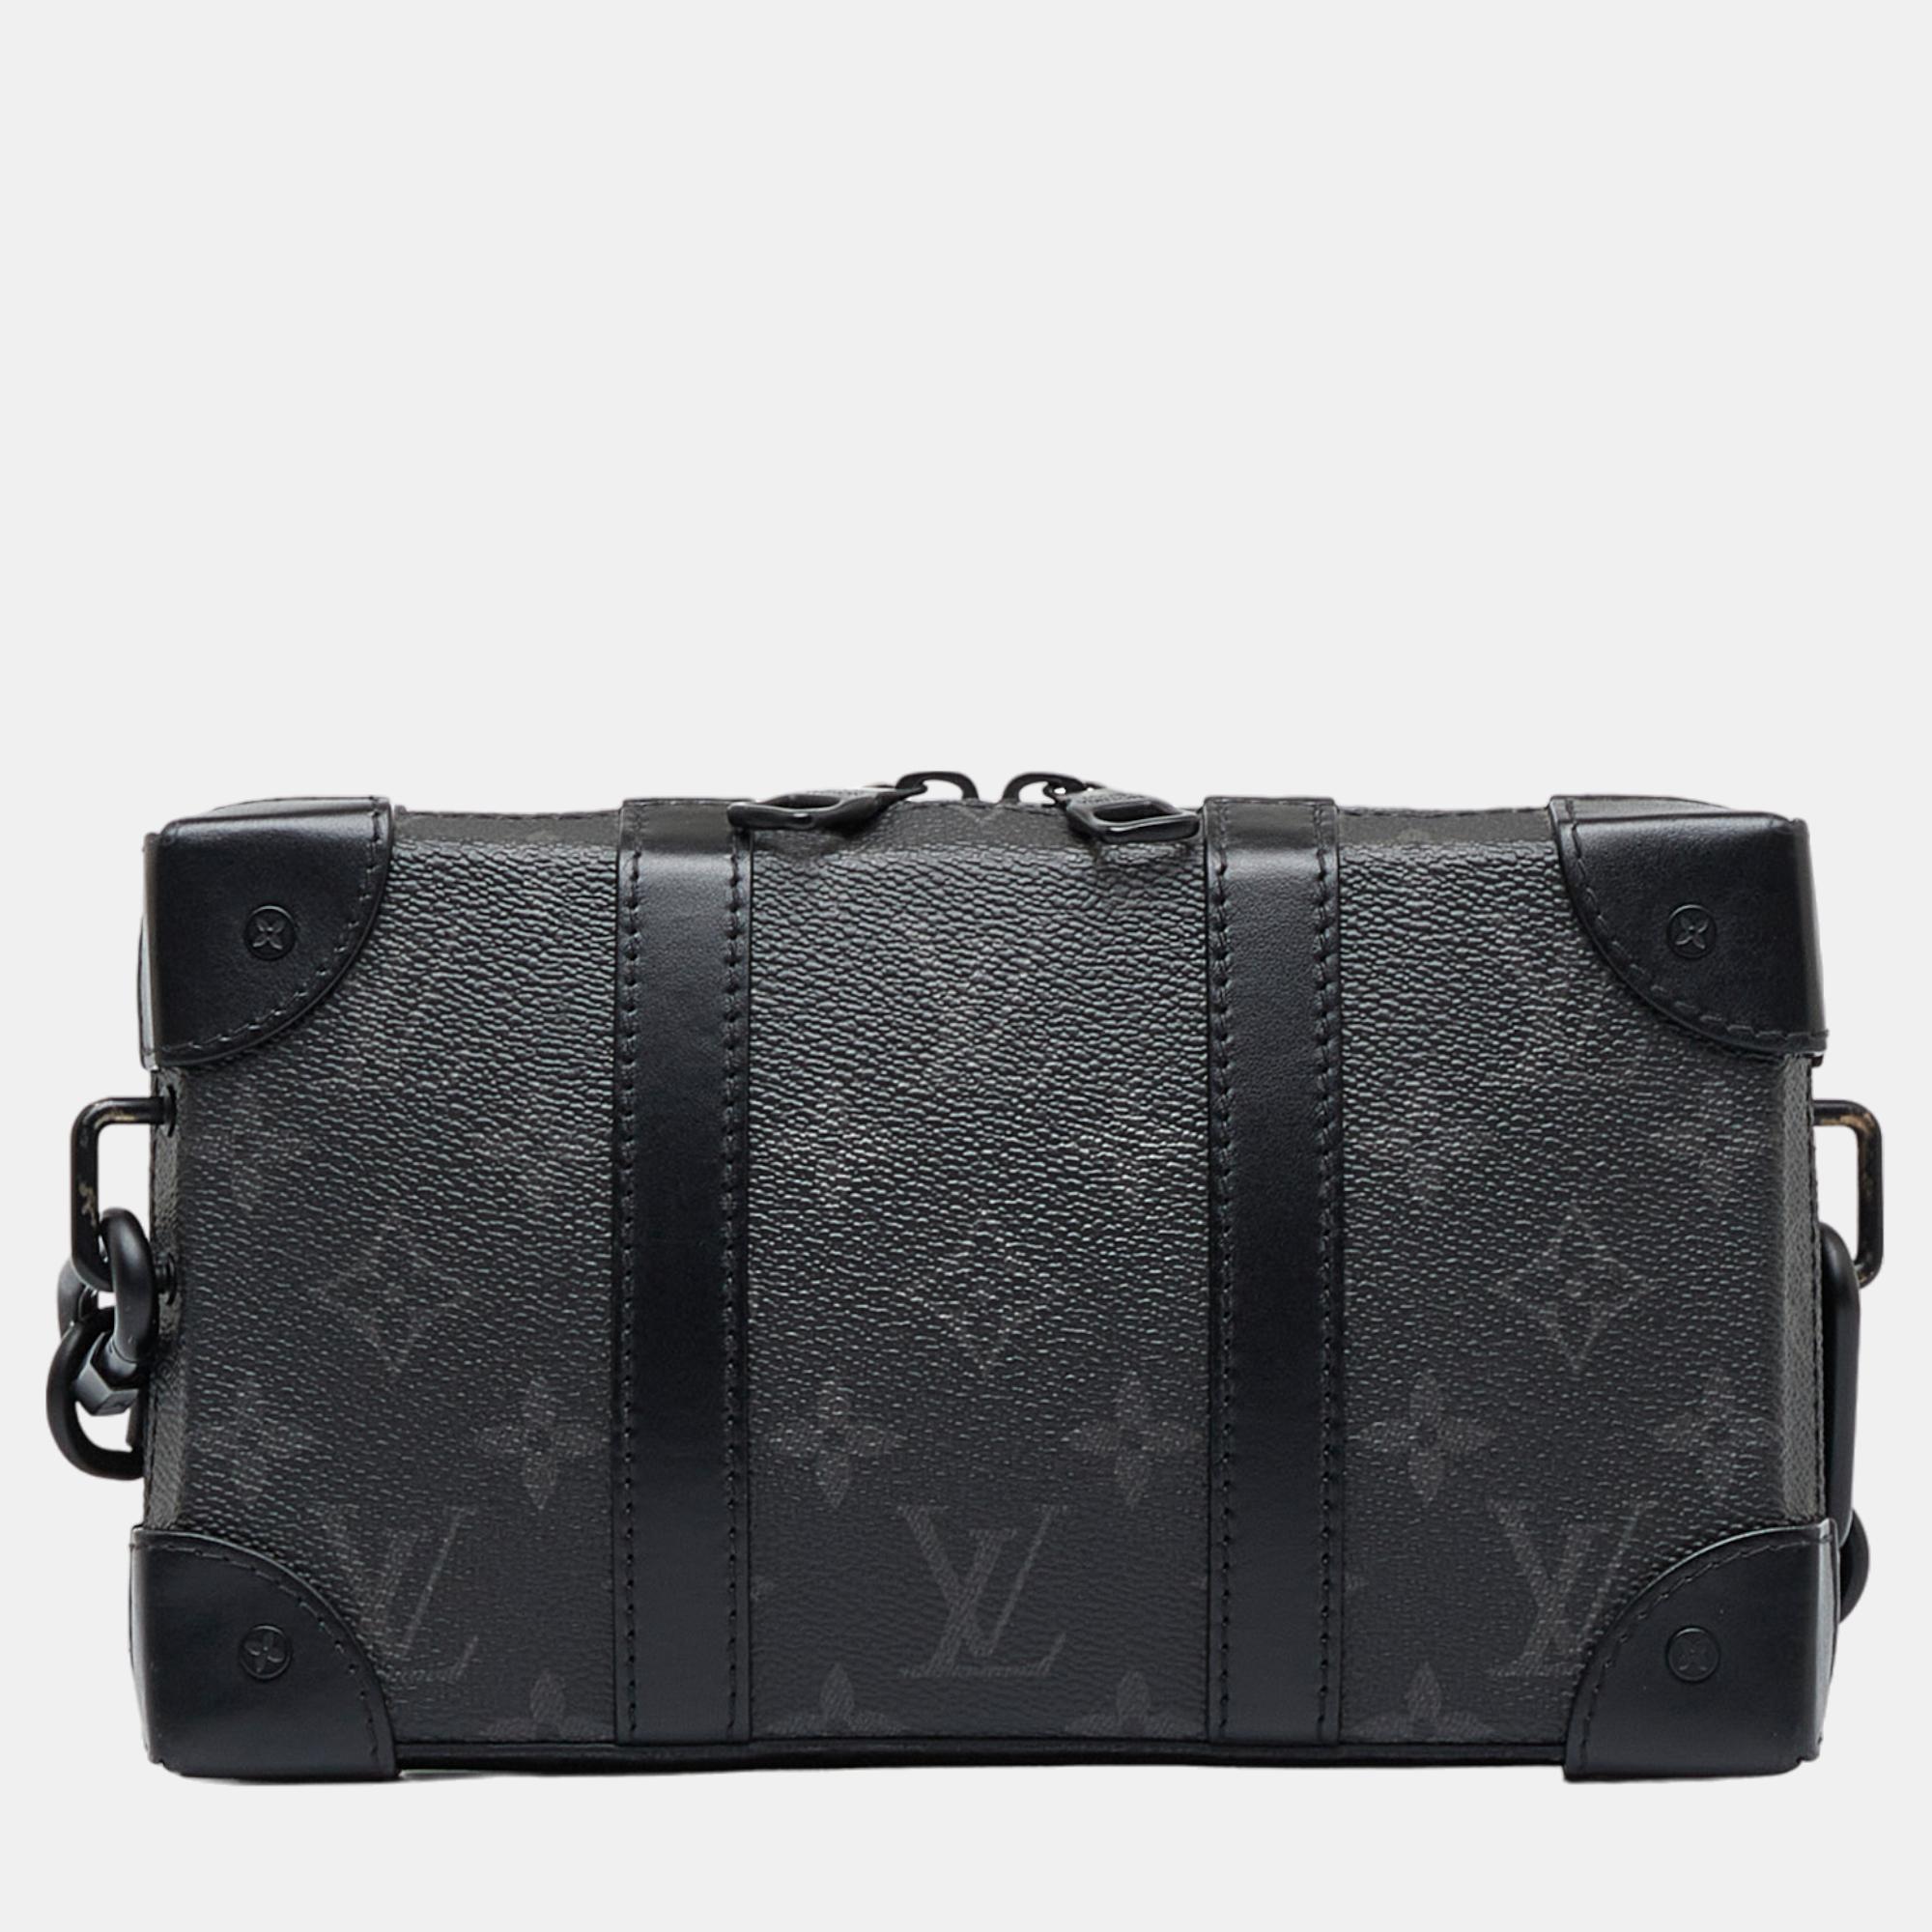 Alpha wearable wallet exotic leathers bag Louis Vuitton Black in